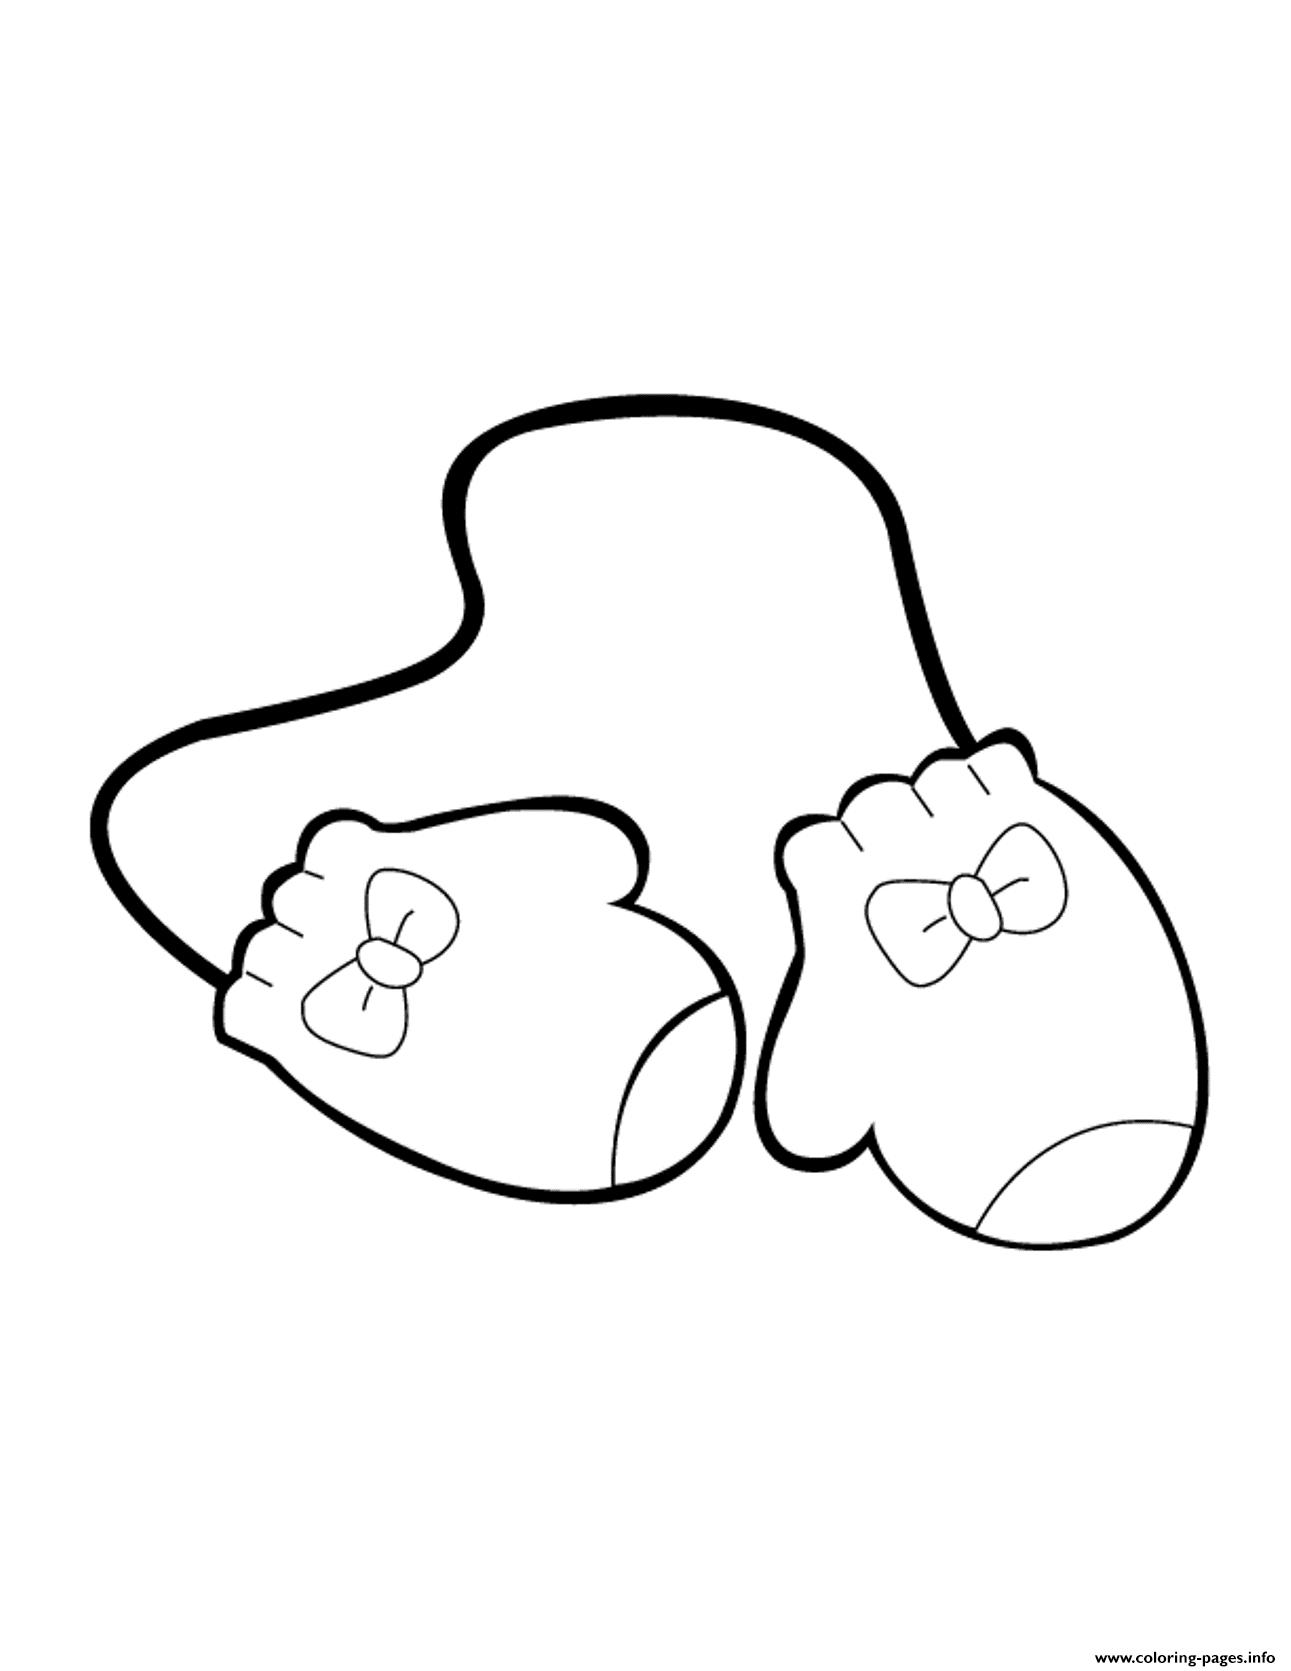 Mitten  For Kids1d0d coloring